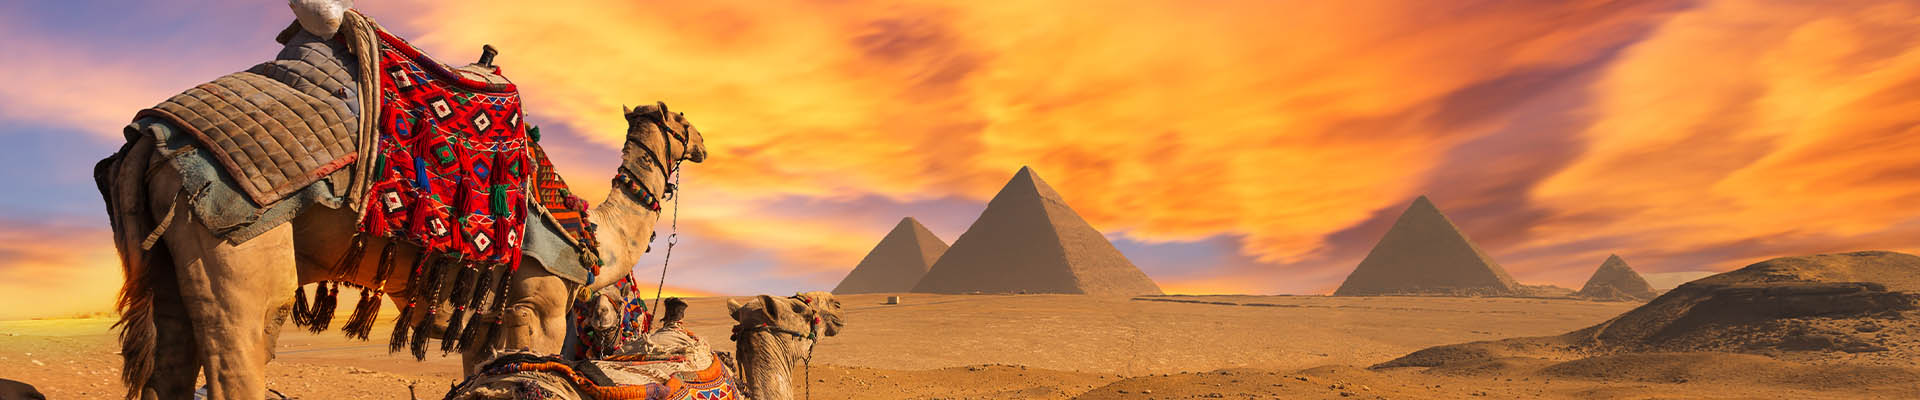 Israel and Egypt Tour with 17 Day Tour with the Sonesta St George Nile Cruise